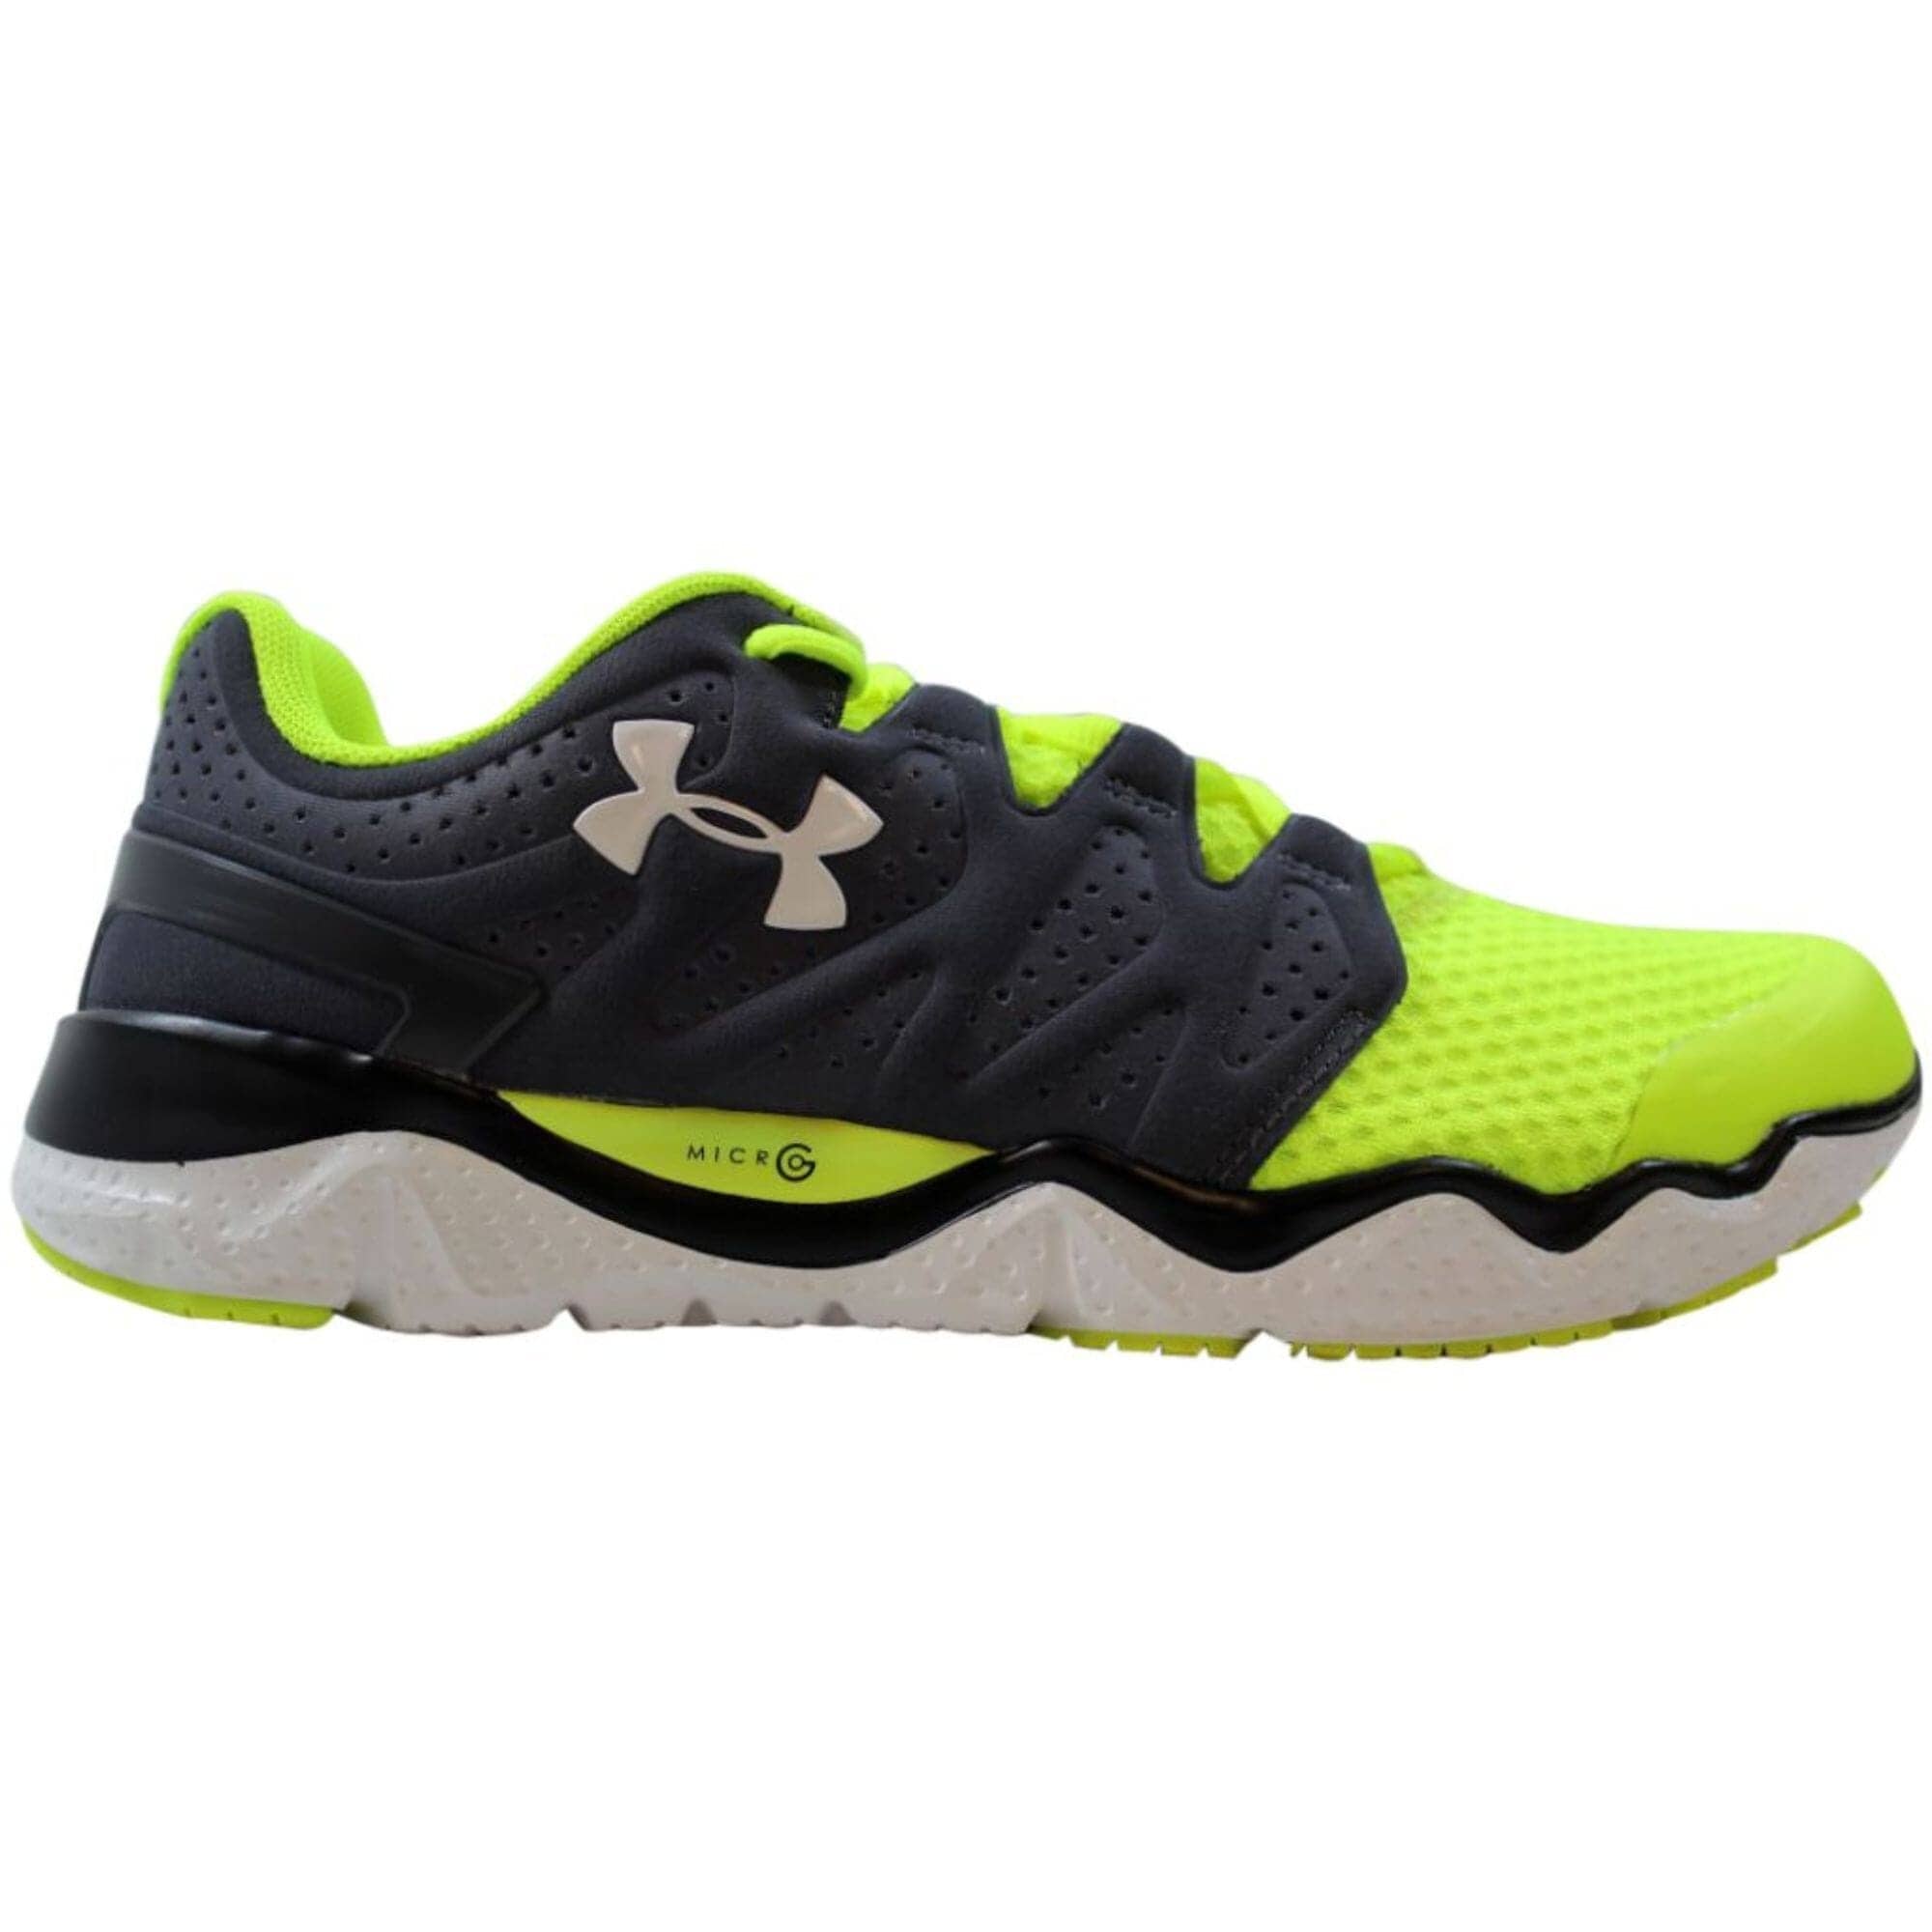 under armour micro g elevate shoes